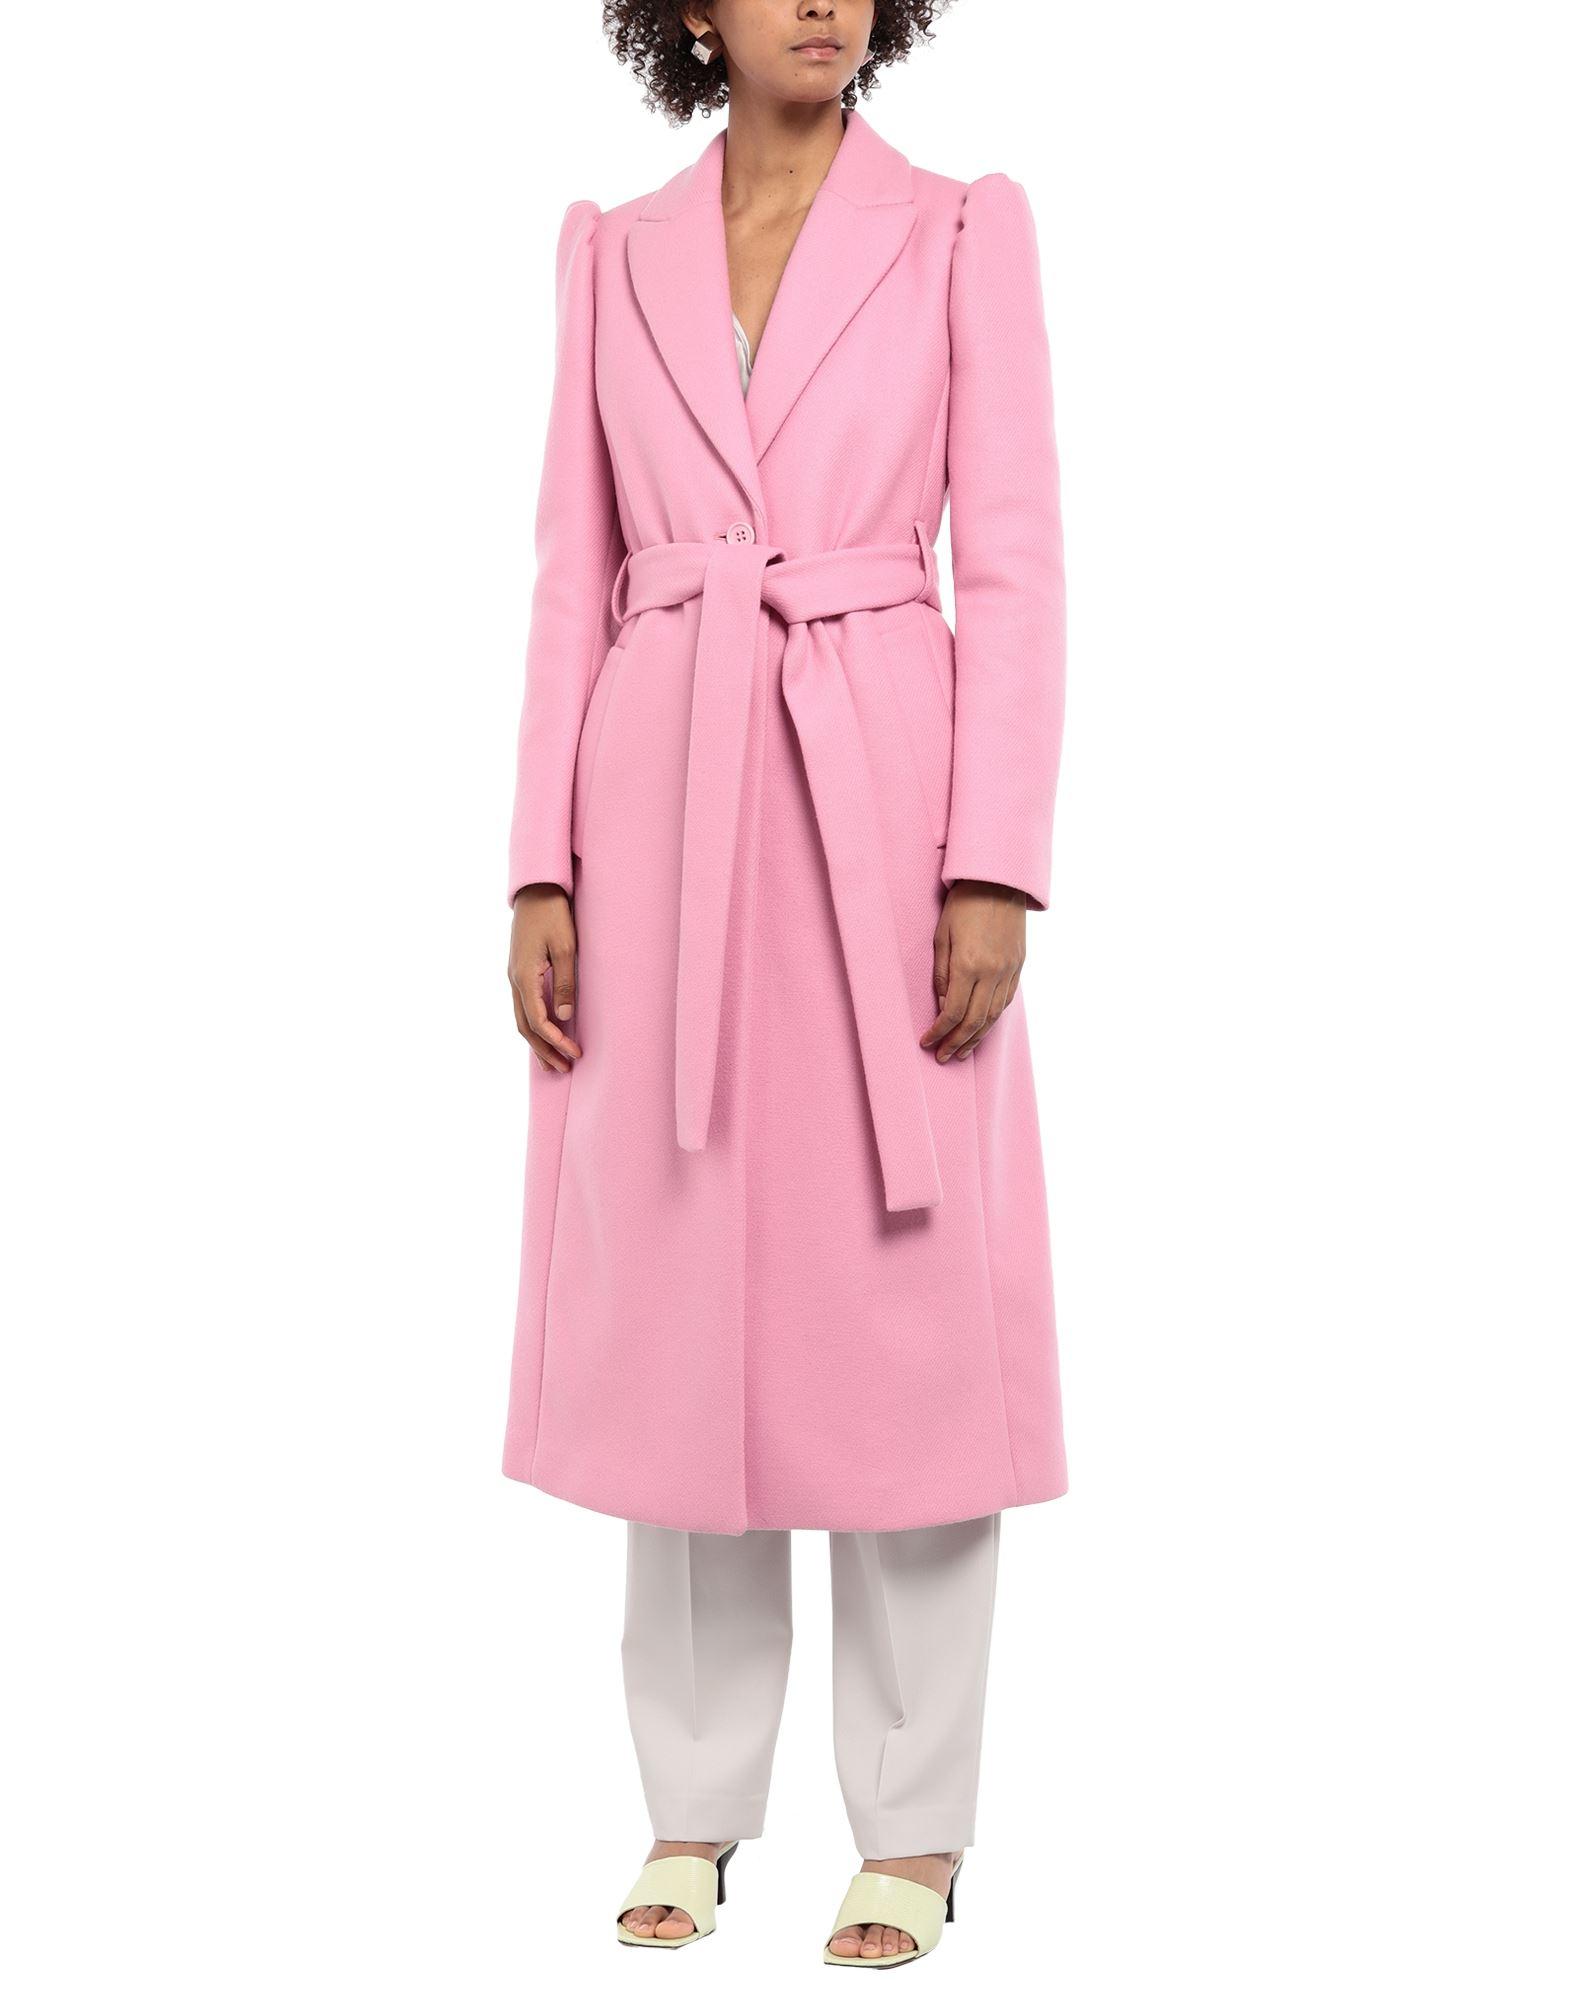 RED Valentino Wool Coat in Pink - Lyst